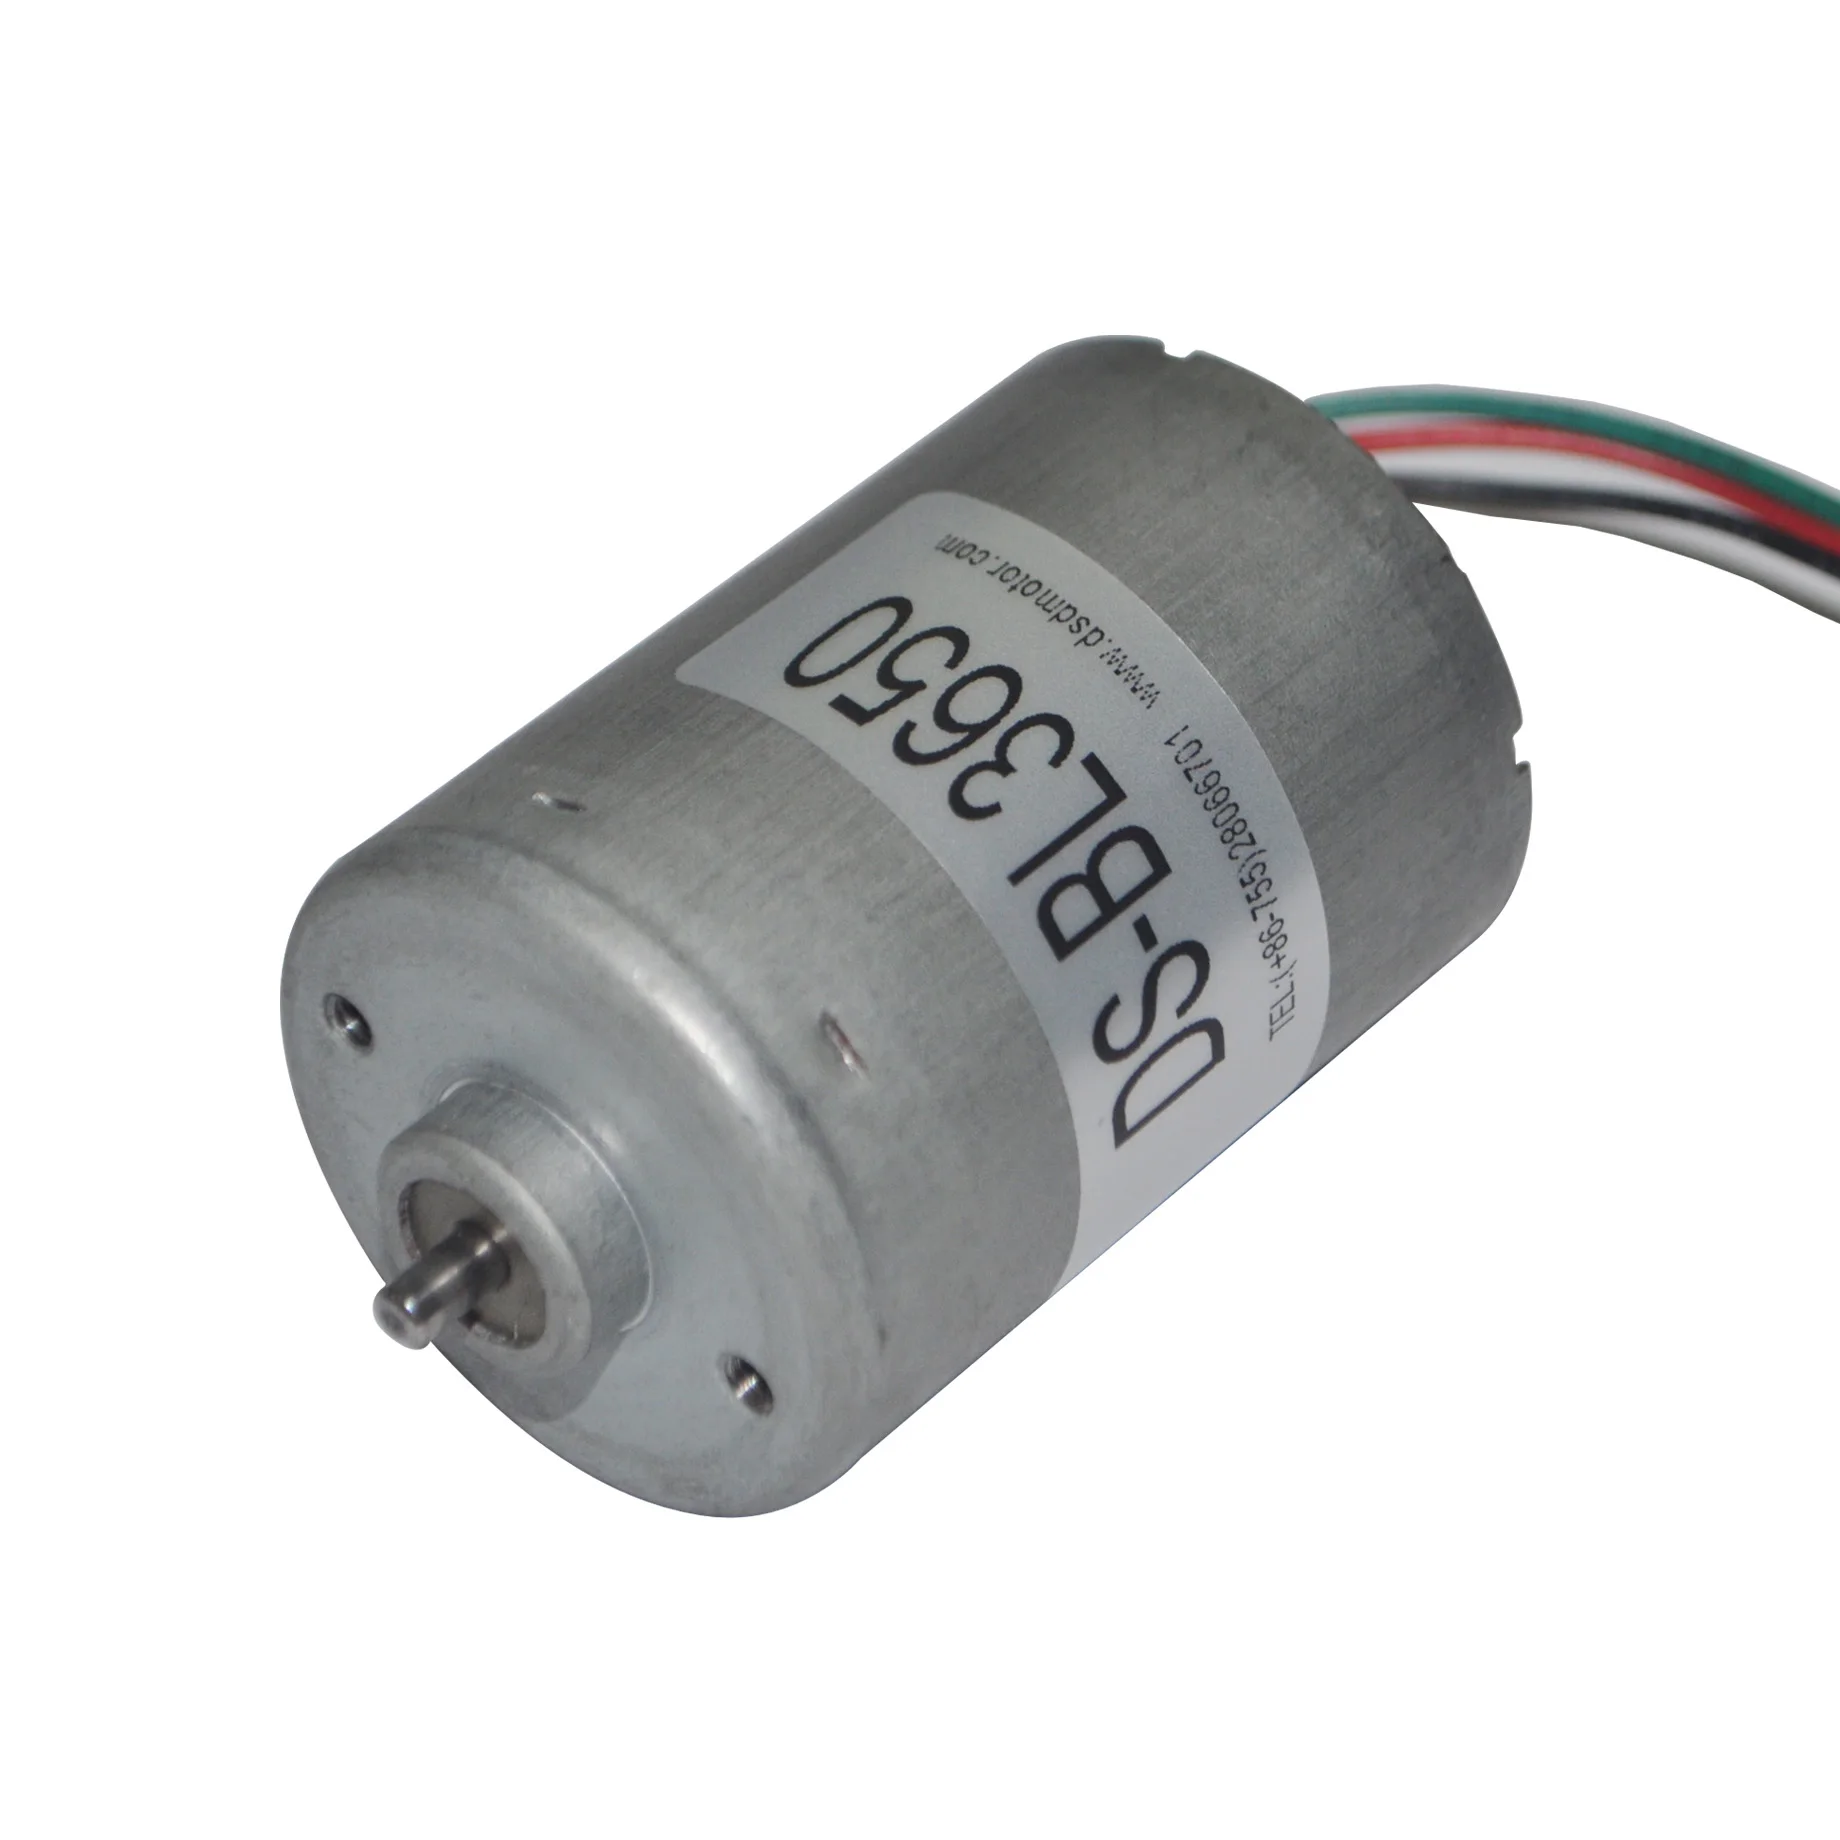 DSD-BL3650 36mm Electric Brushless DC Motor Driver for Massager and Hair Dryer 118-376gf.cm